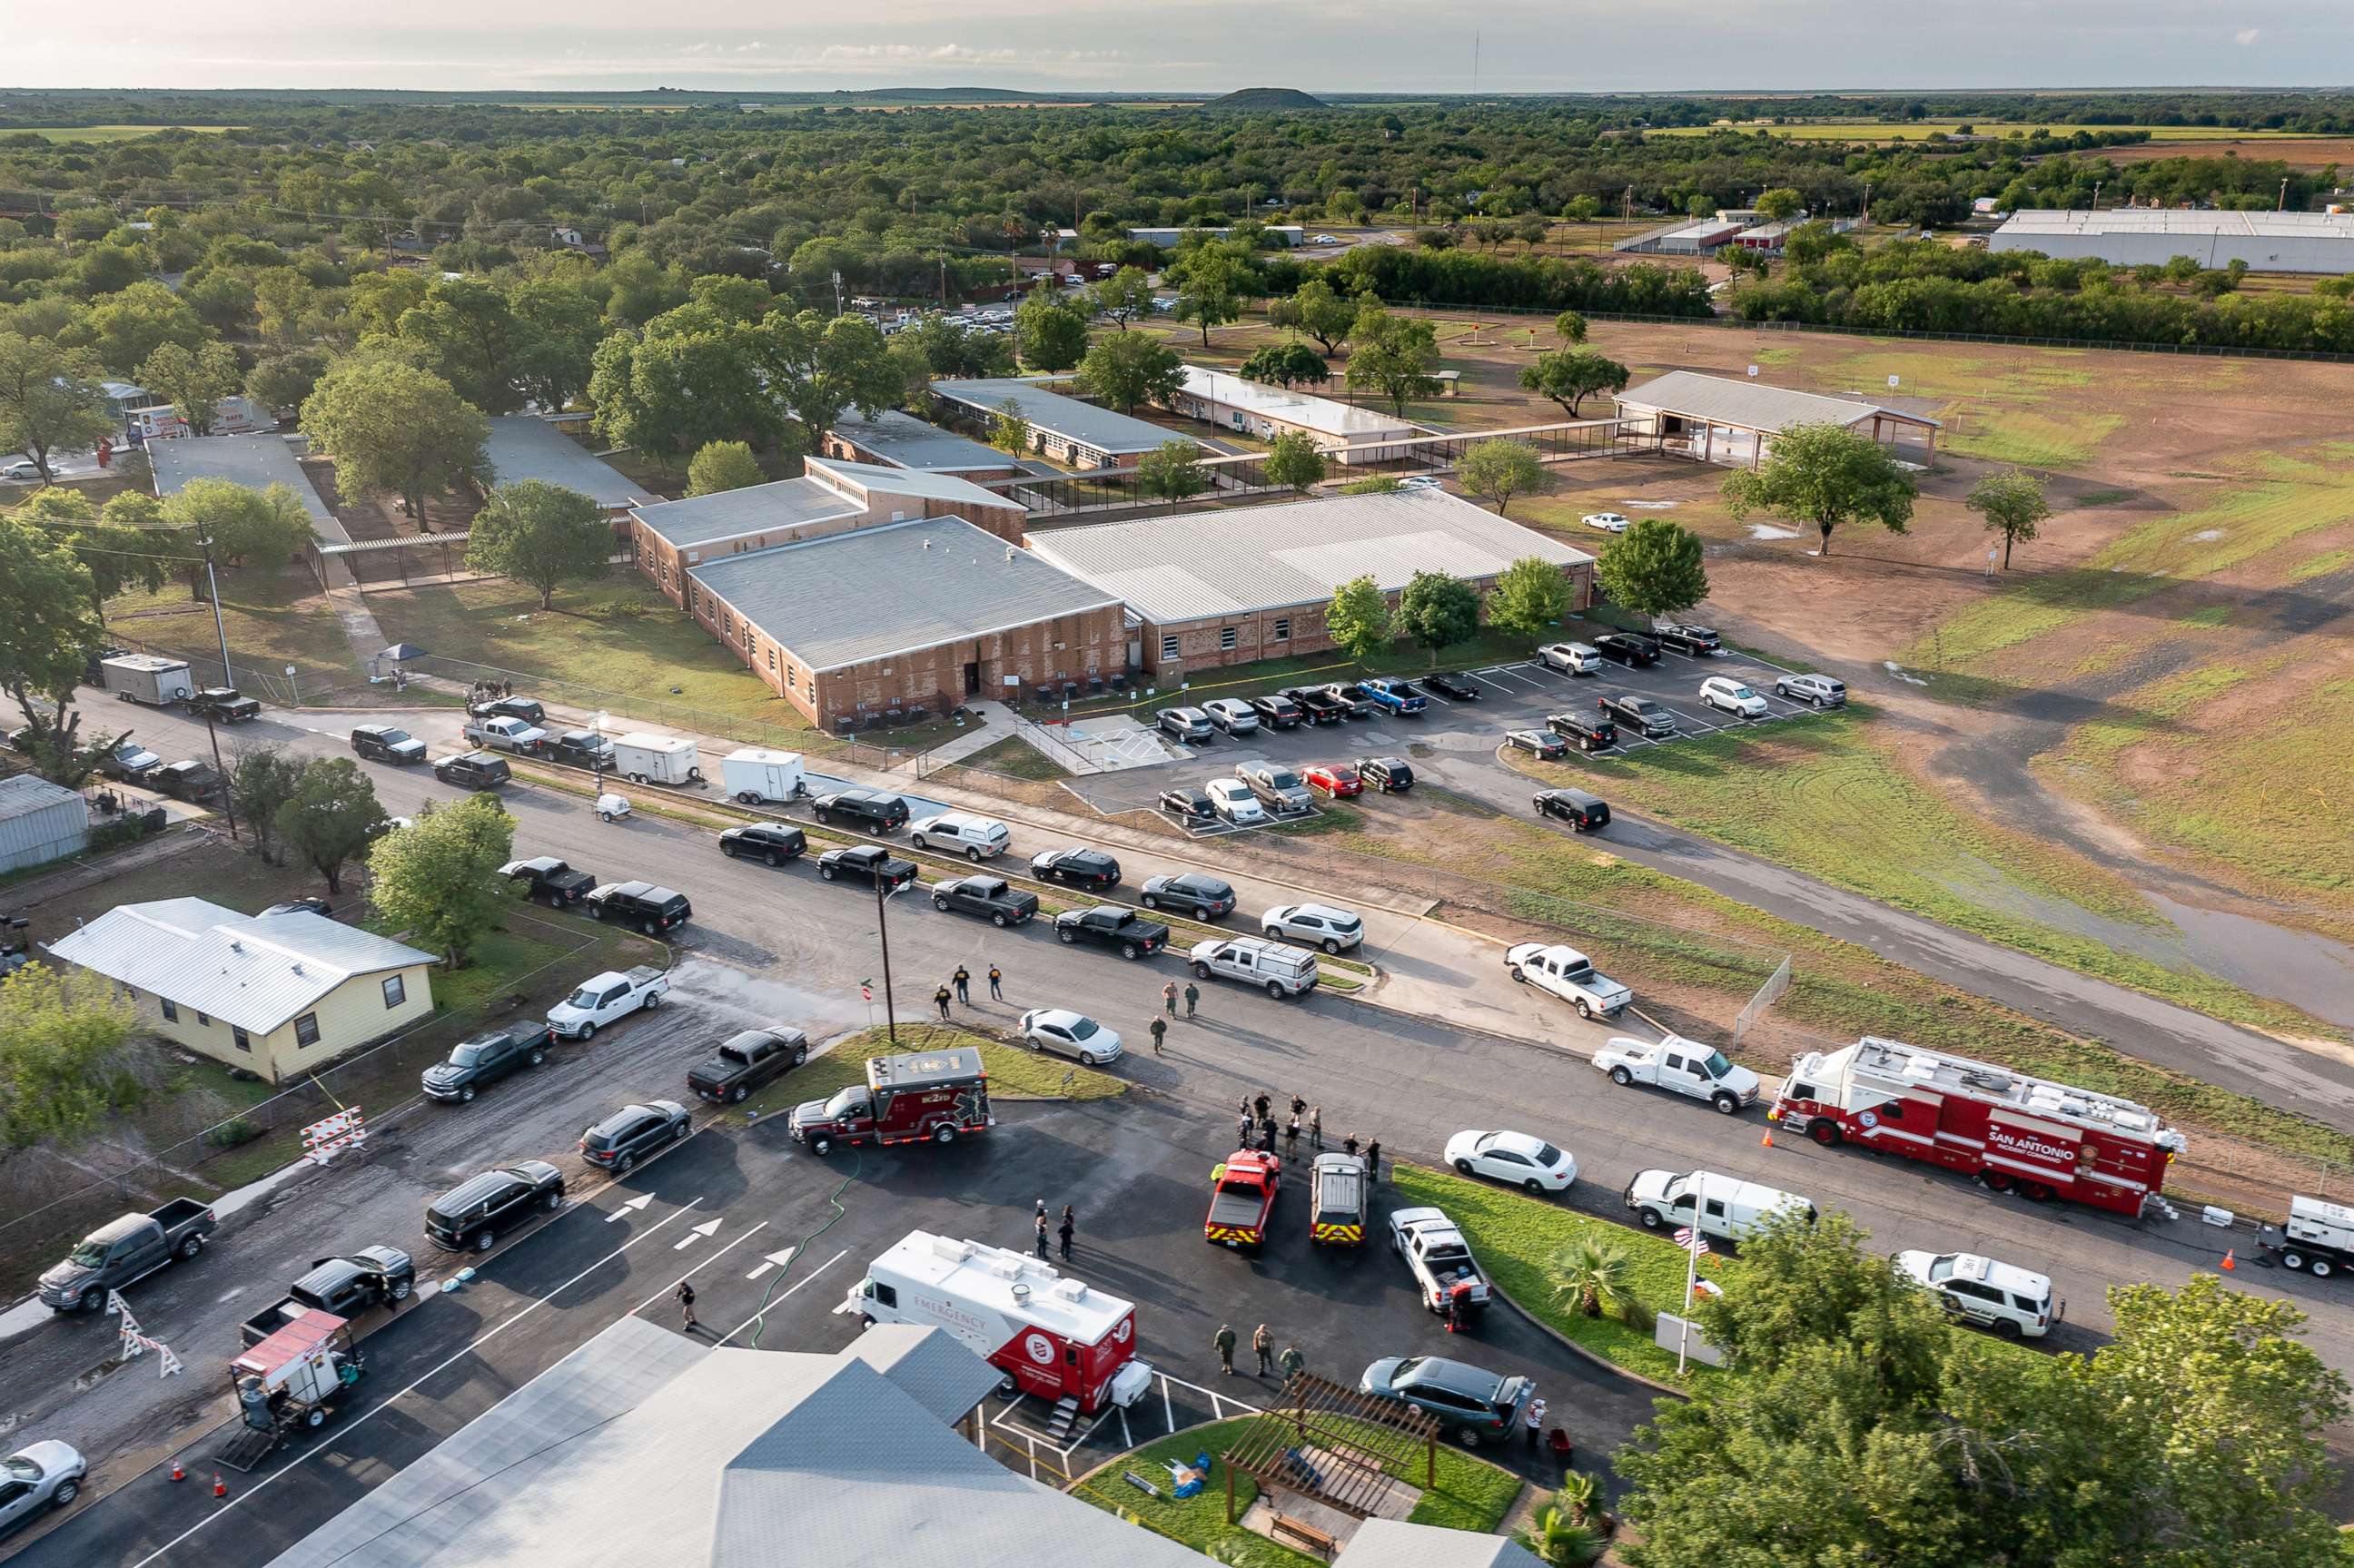 PHOTO: An aerial view of Robb Elementary School, May 25, 2022, as law enforcement works at the scene of a May 24 mass shooting that left 21 people dead, including 19 children, in Uvalde, Texas.